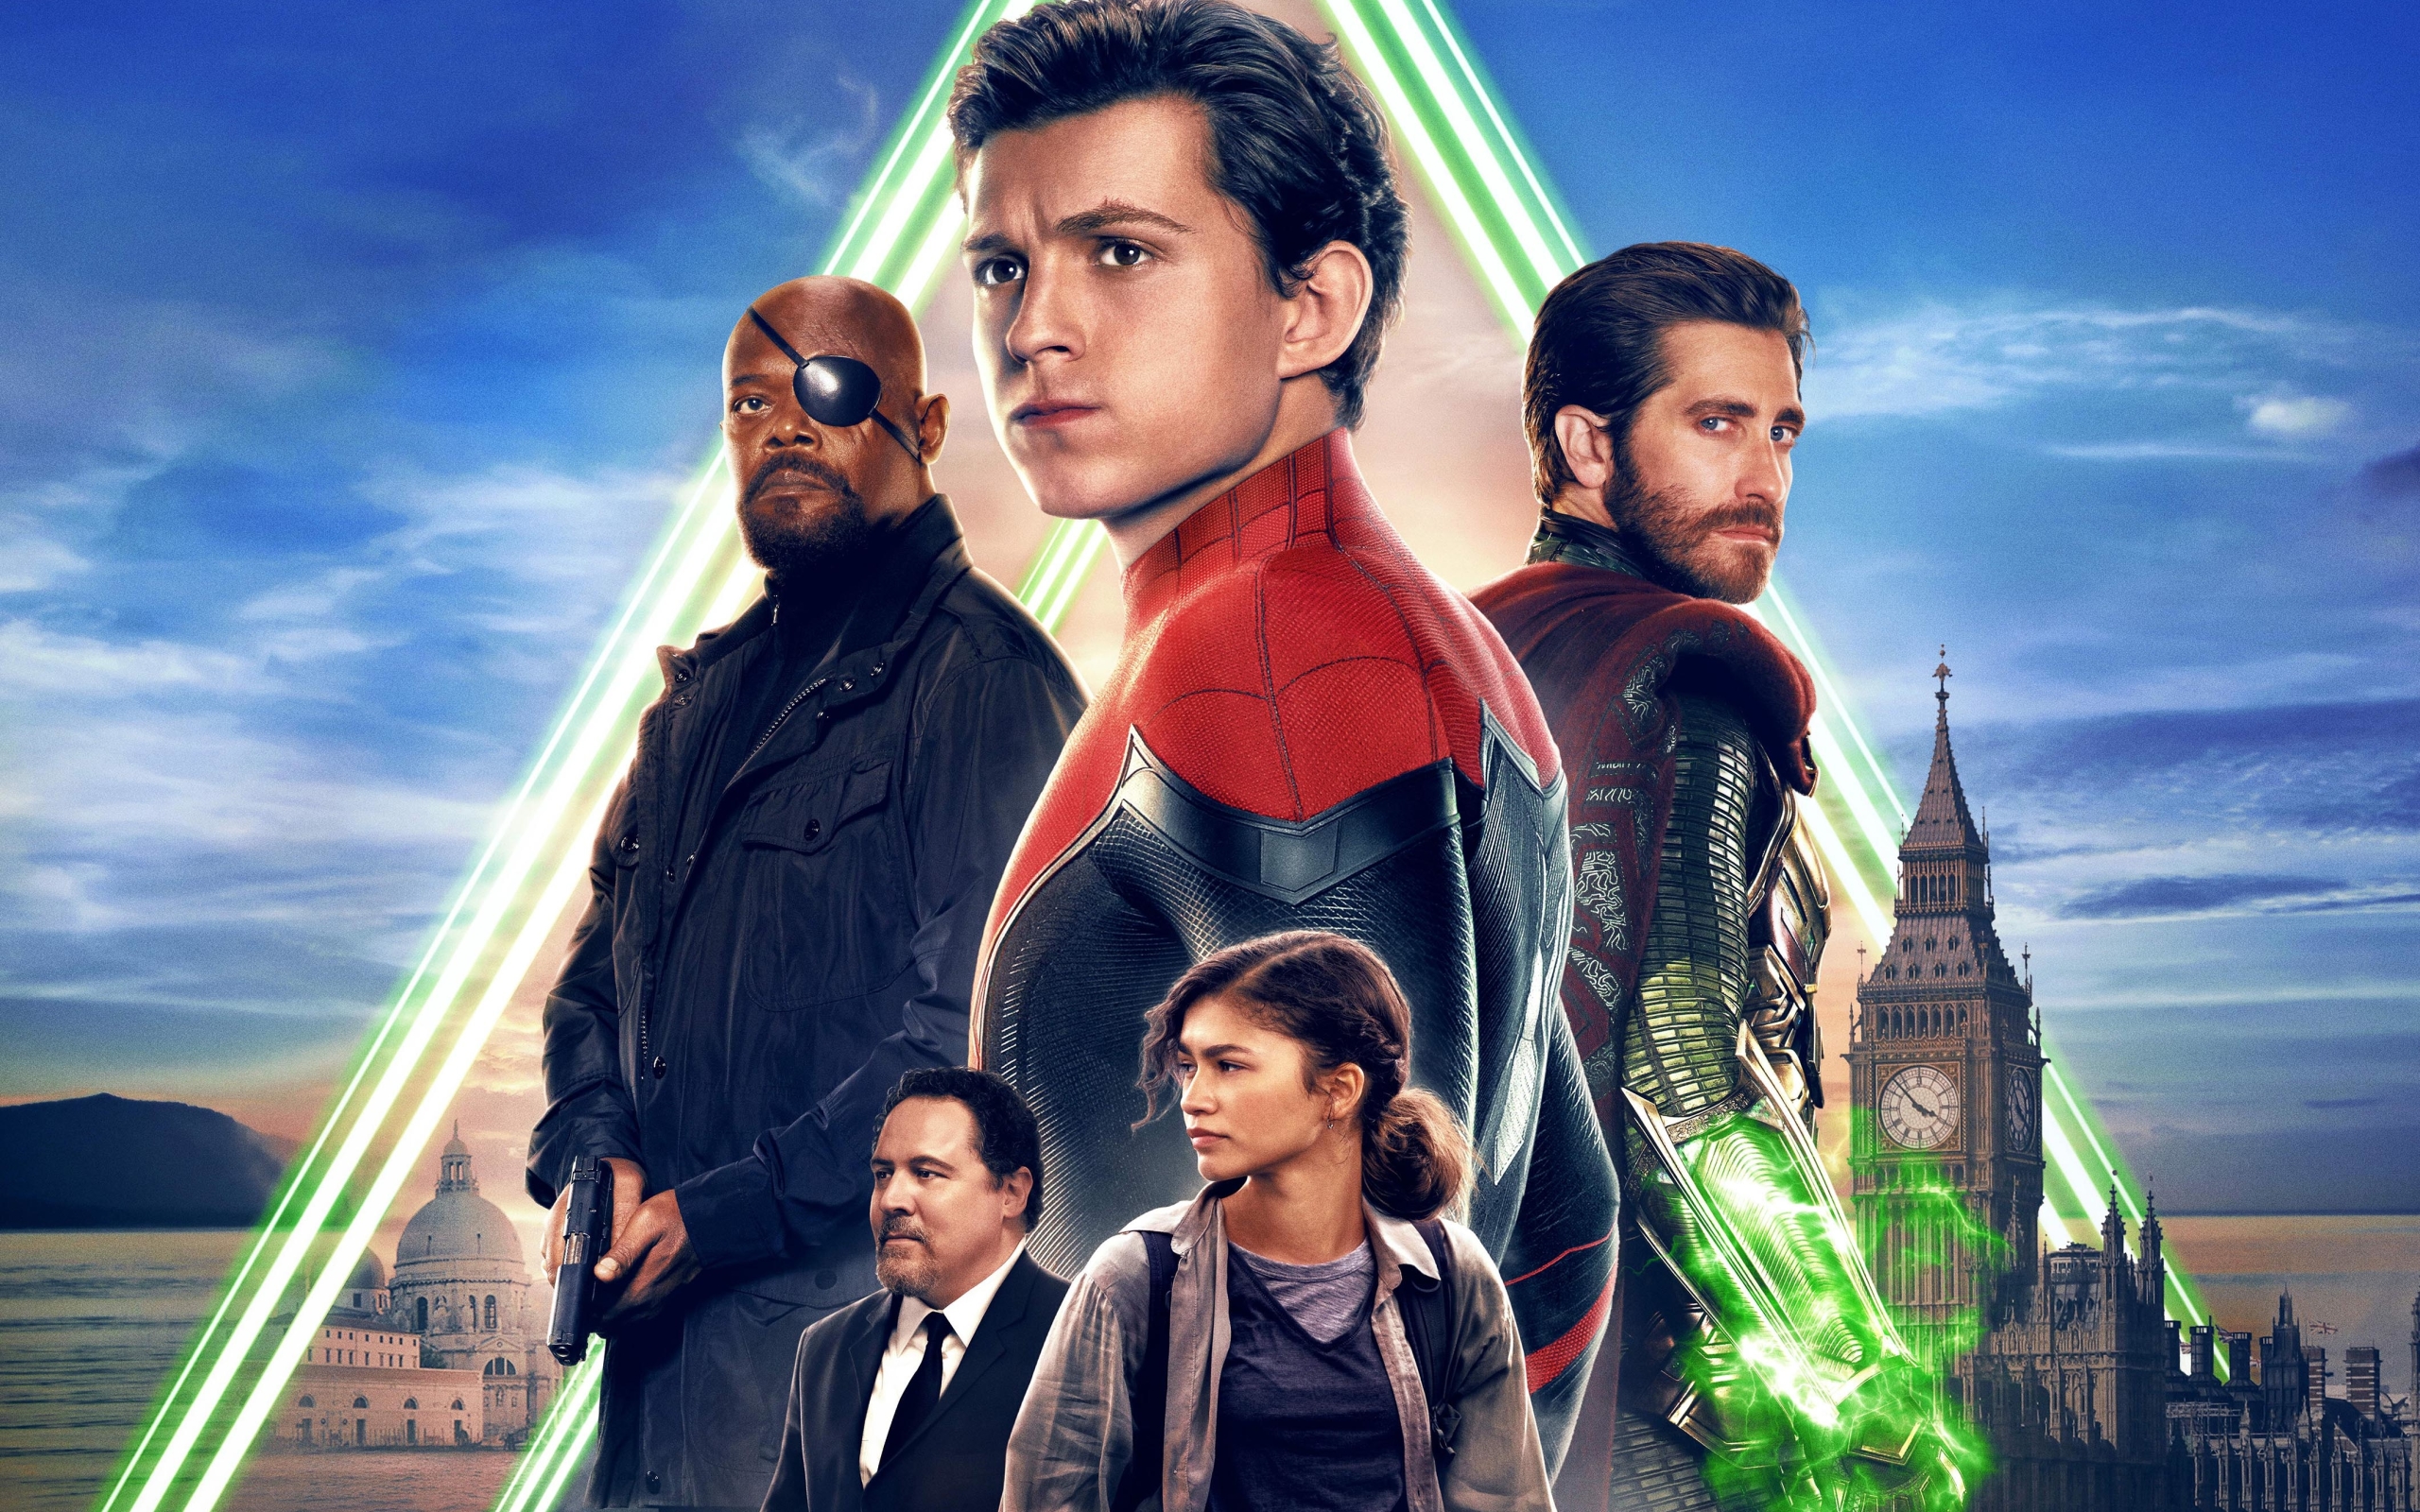 Wallpaper Of Spider-man, Far From Home, Tom Holland, - Spider Man Far From Home Cast - HD Wallpaper 